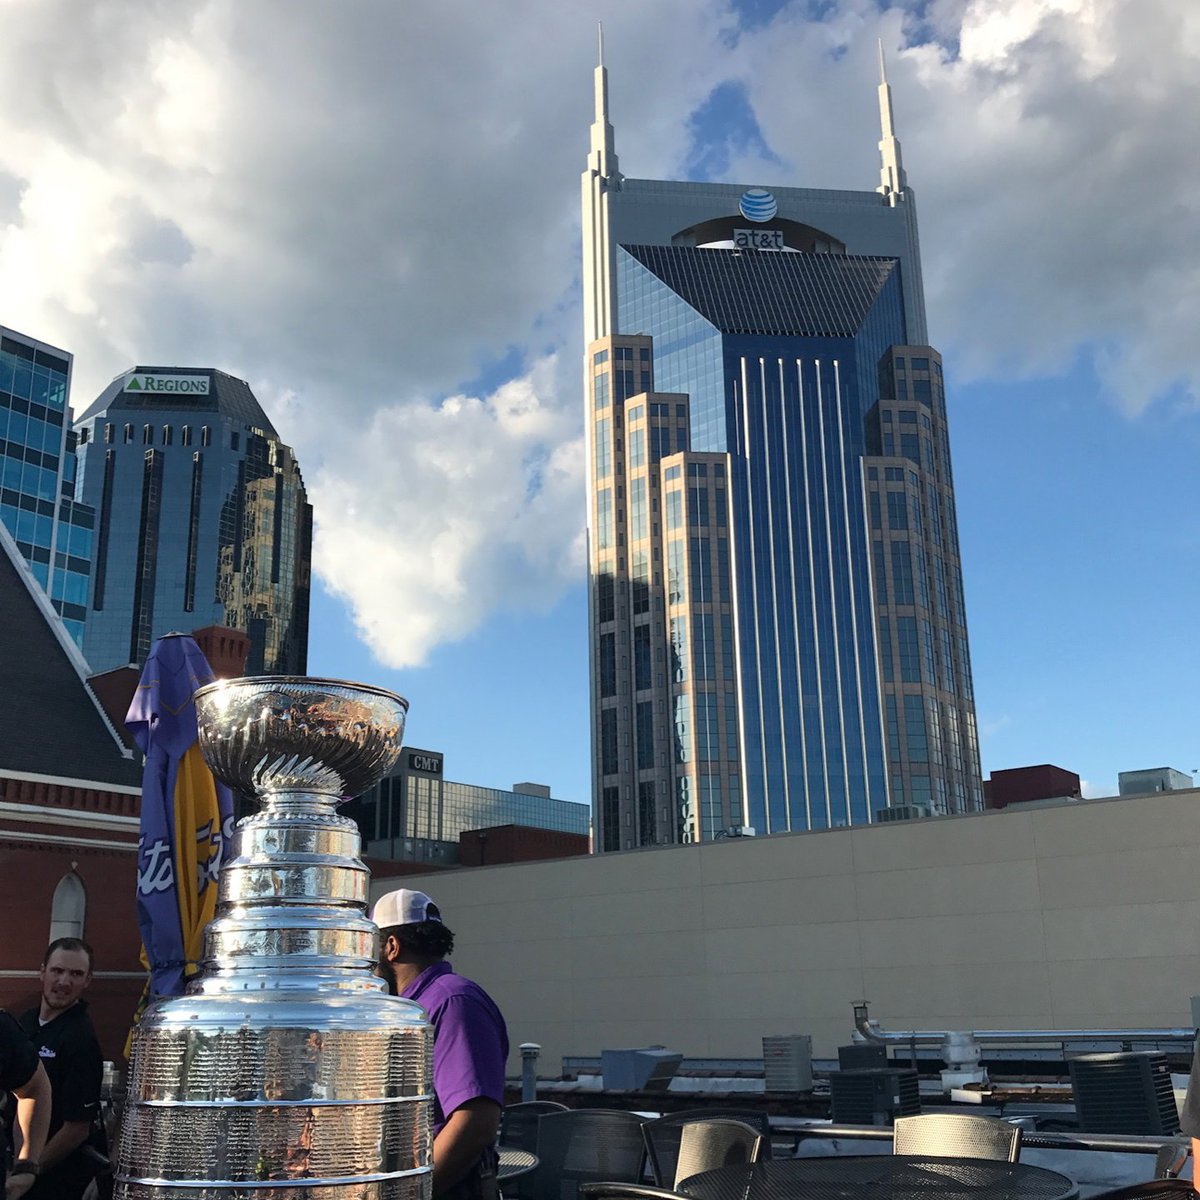 #throwback to the last time the Cup was in town and hanging out on our rooftop. Will this be our year? Watch our hometown team take on Dallas tomorrow night!